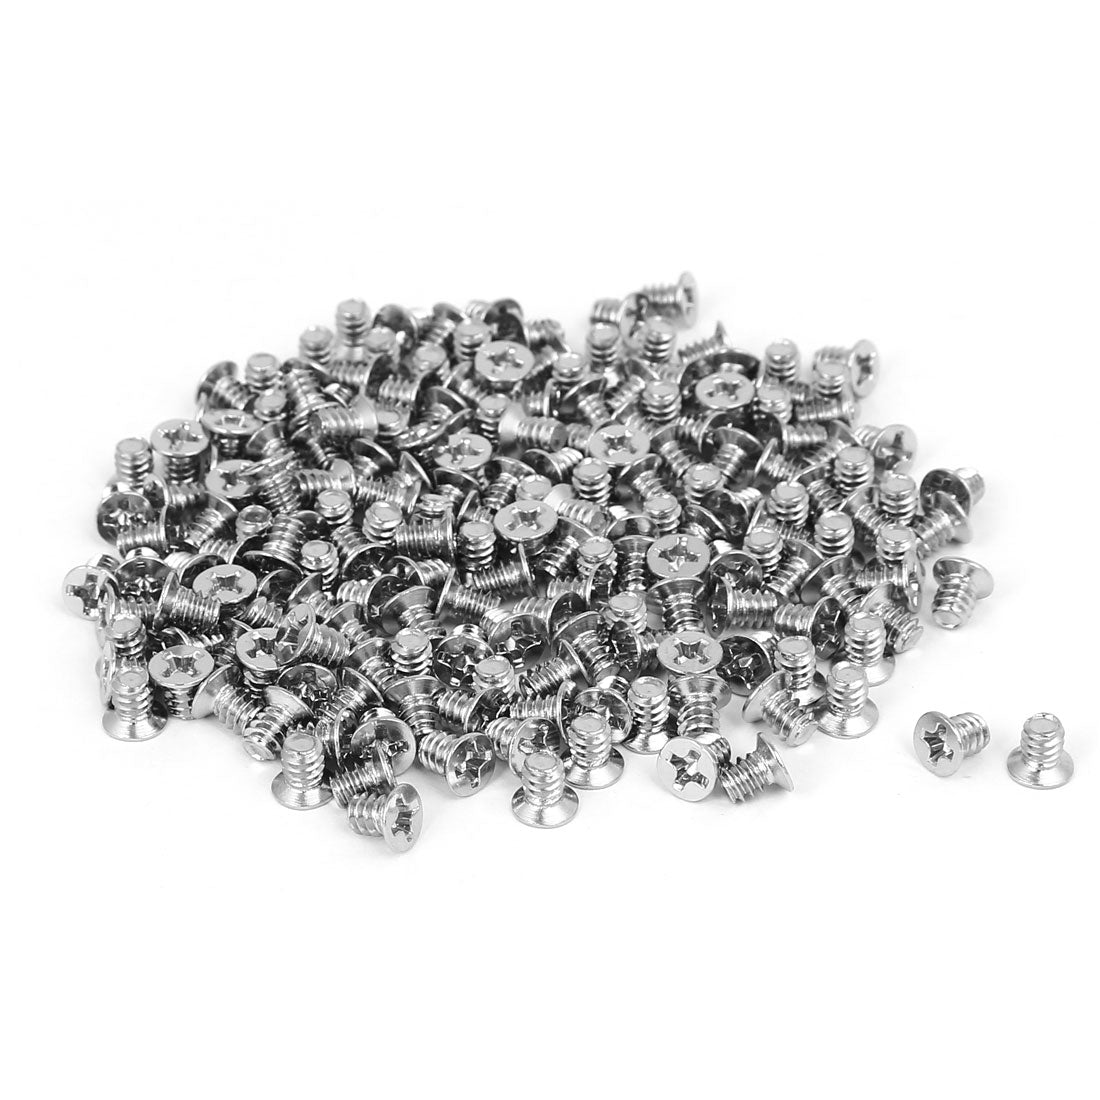 Uxcell M1.4 x 4mm Tiny Screws Phillips Flat Head Screws Carbon Steel Machine Screws for Glasses Spectacles Watch and Other Small Electronics 150pcs 